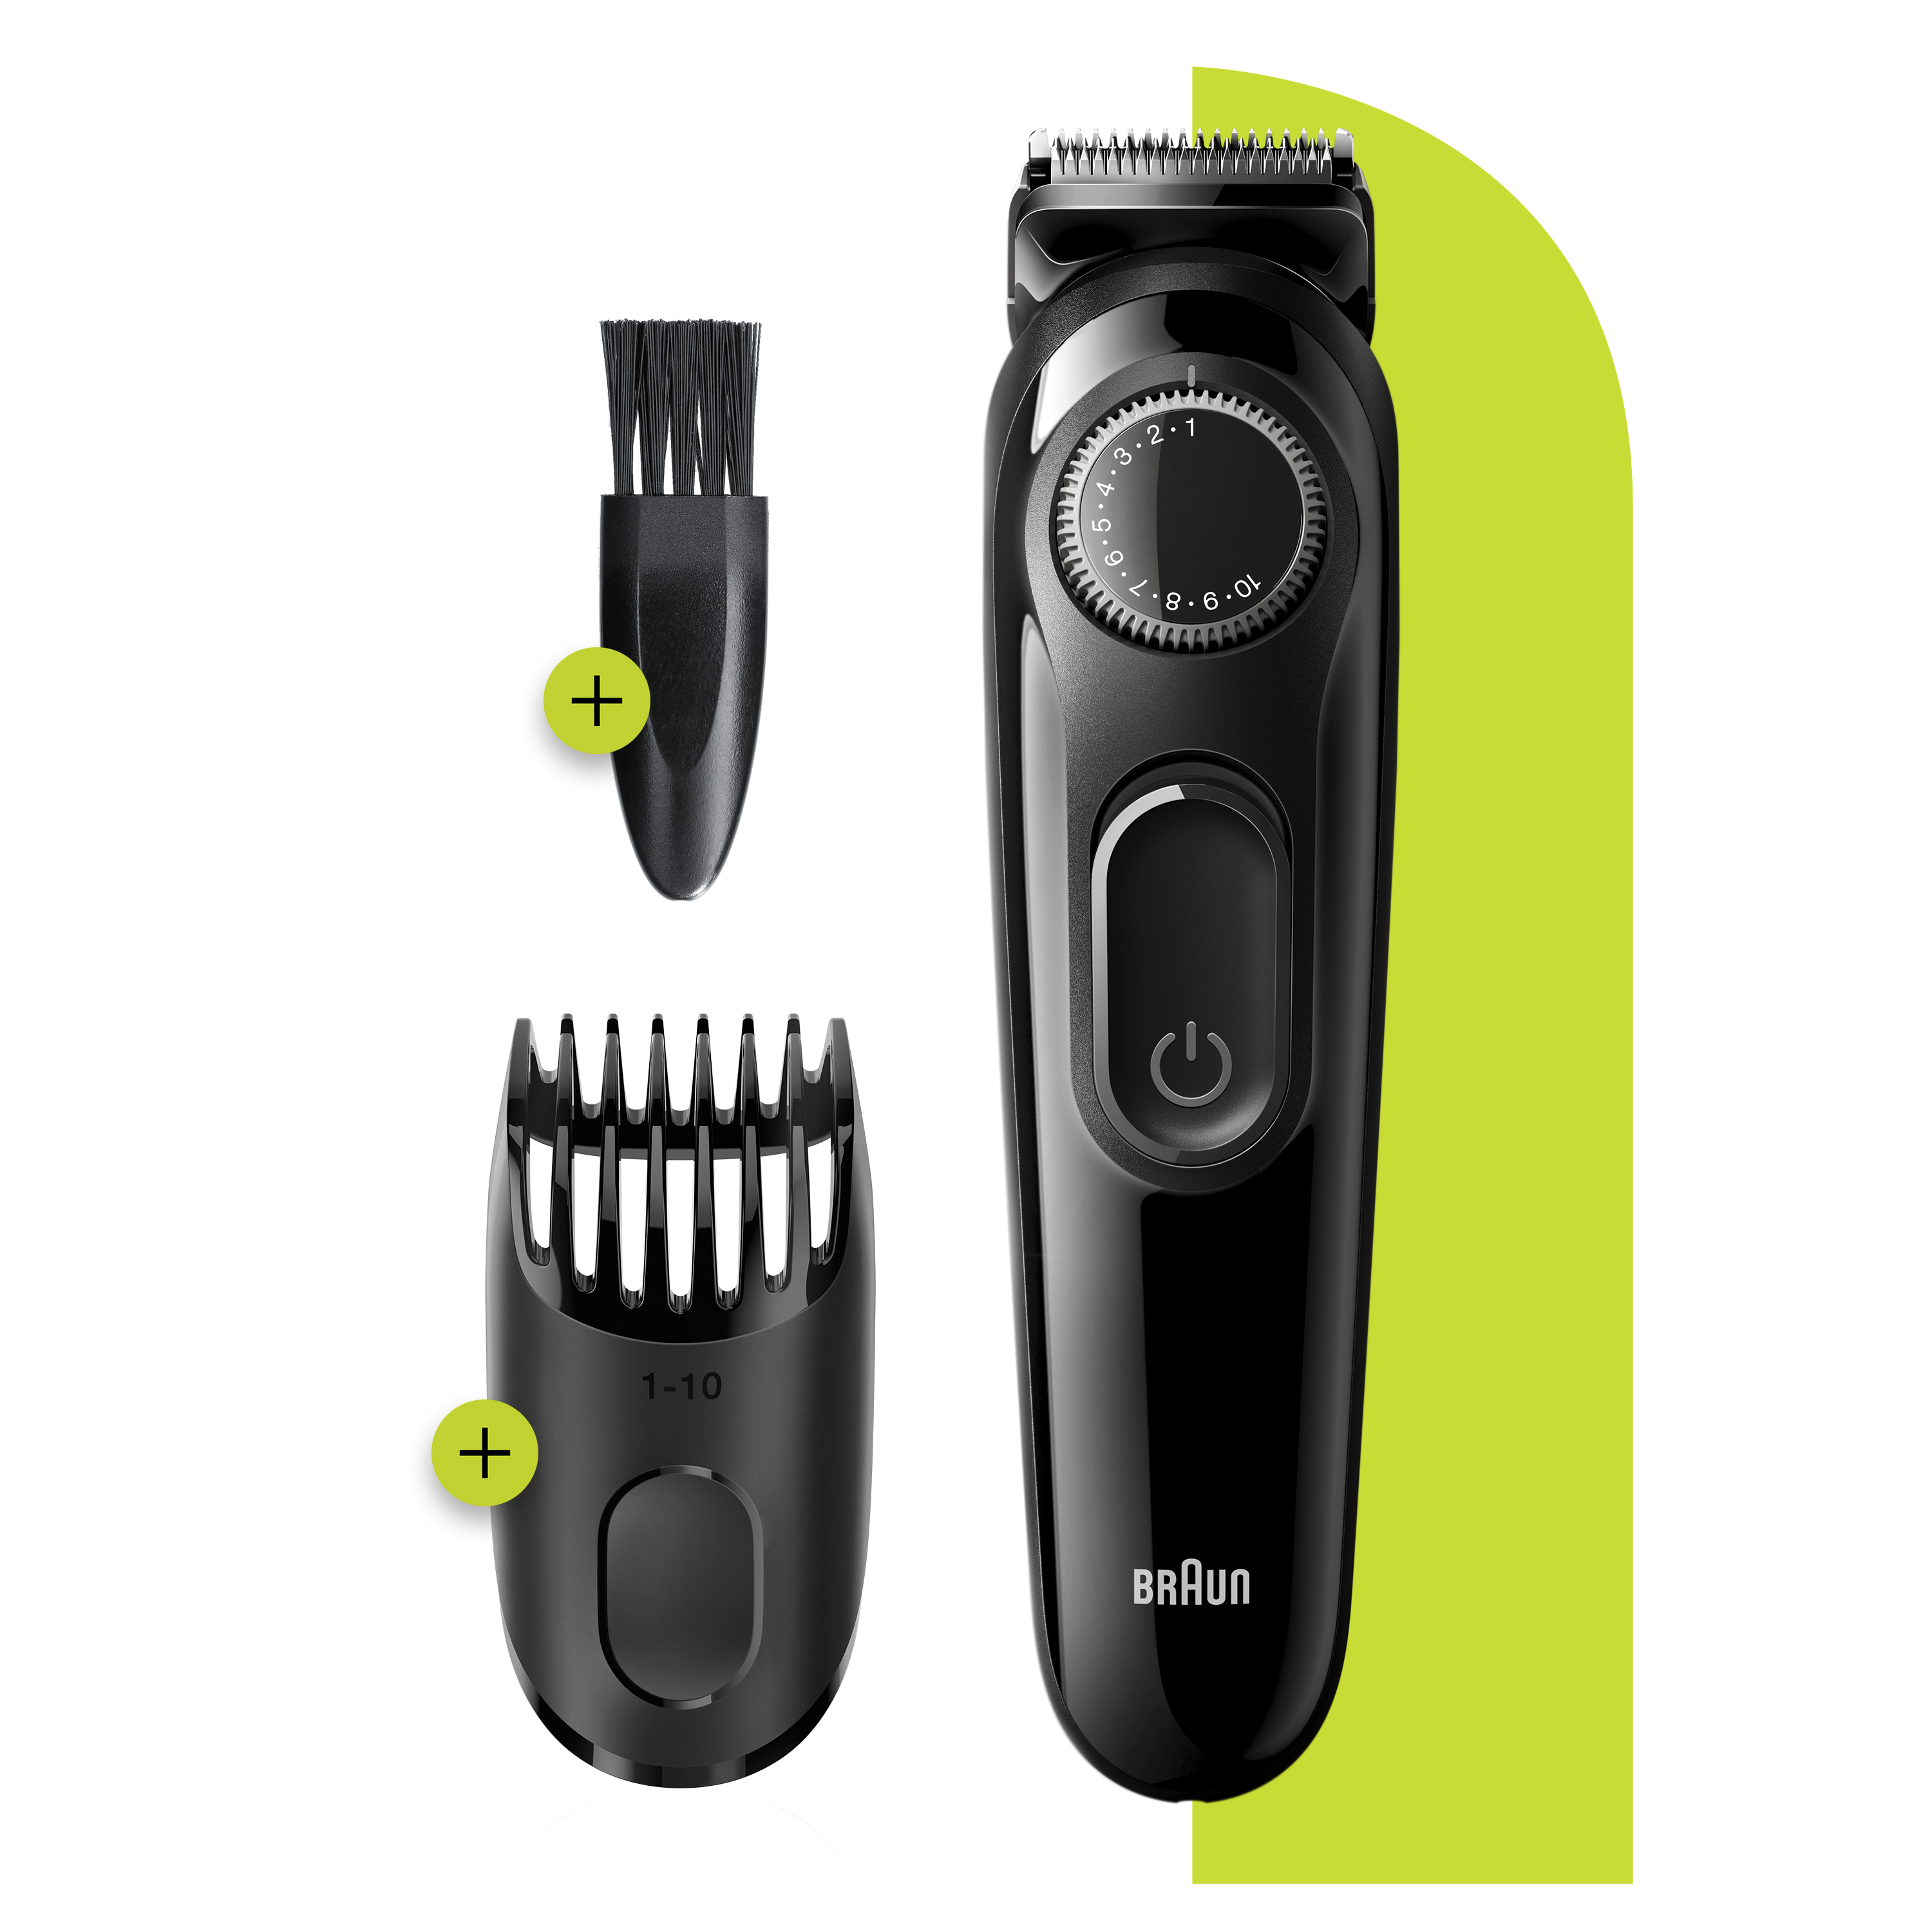 philips body trimmer blade